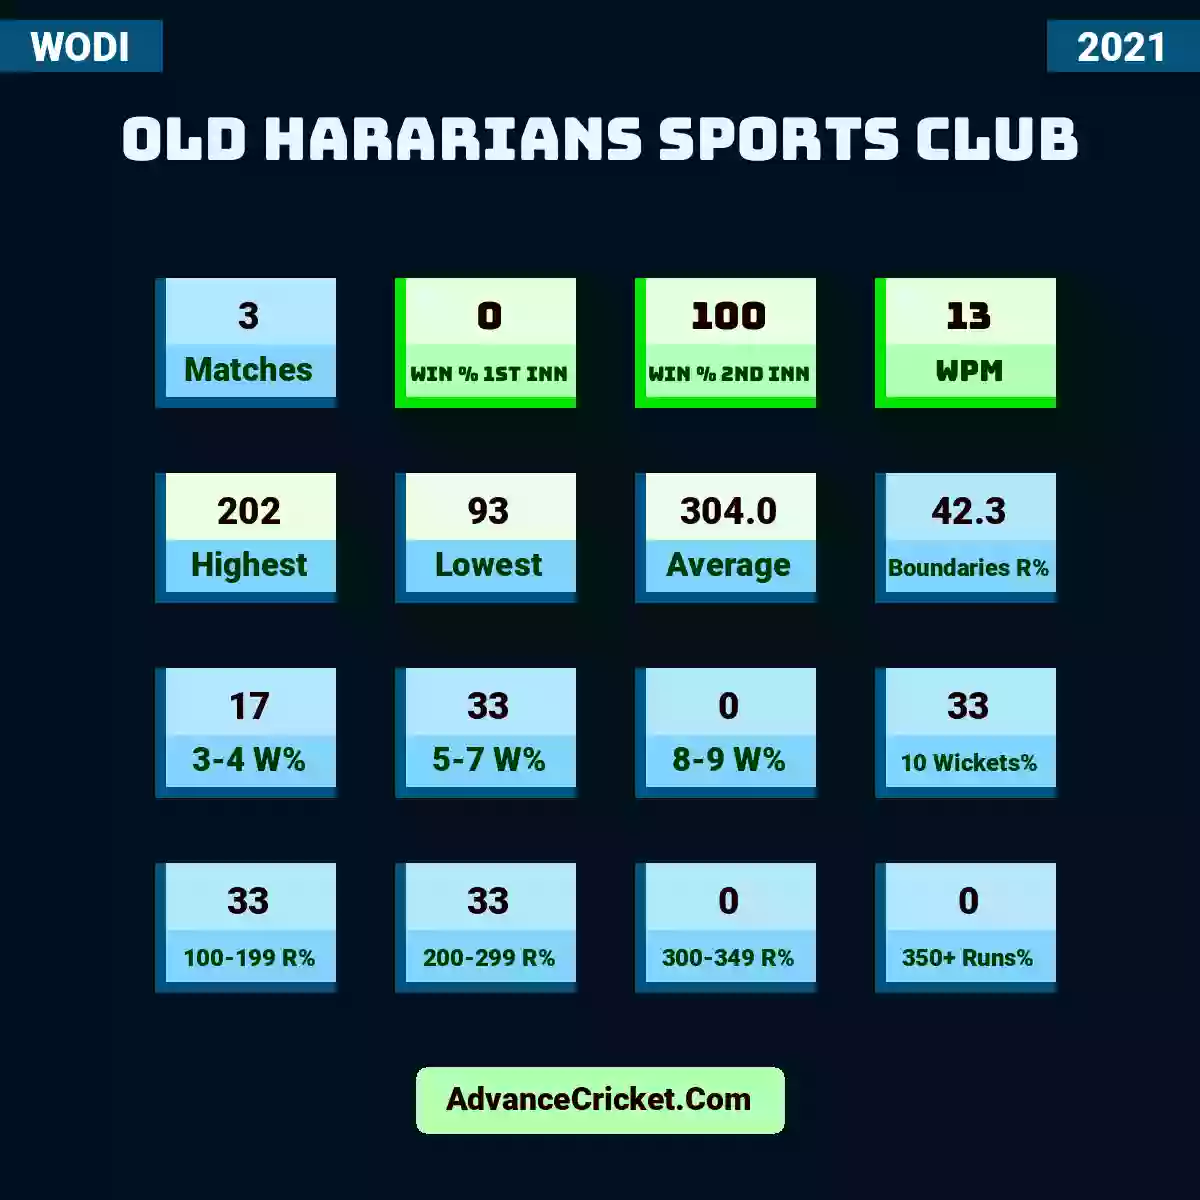 Image showing Old Hararians Sports Club with Matches: 3, Win % 1st Inn: 0, Win % 2nd Inn: 100, WPM: 13, Highest: 202, Lowest: 93, Average: 304.0, Boundaries R%: 42.3, 3-4 W%: 17, 5-7 W%: 33, 8-9 W%: 0, 10 Wickets%: 33, 100-199 R%: 33, 200-299 R%: 33, 300-349 R%: 0, 350+ Runs%: 0.